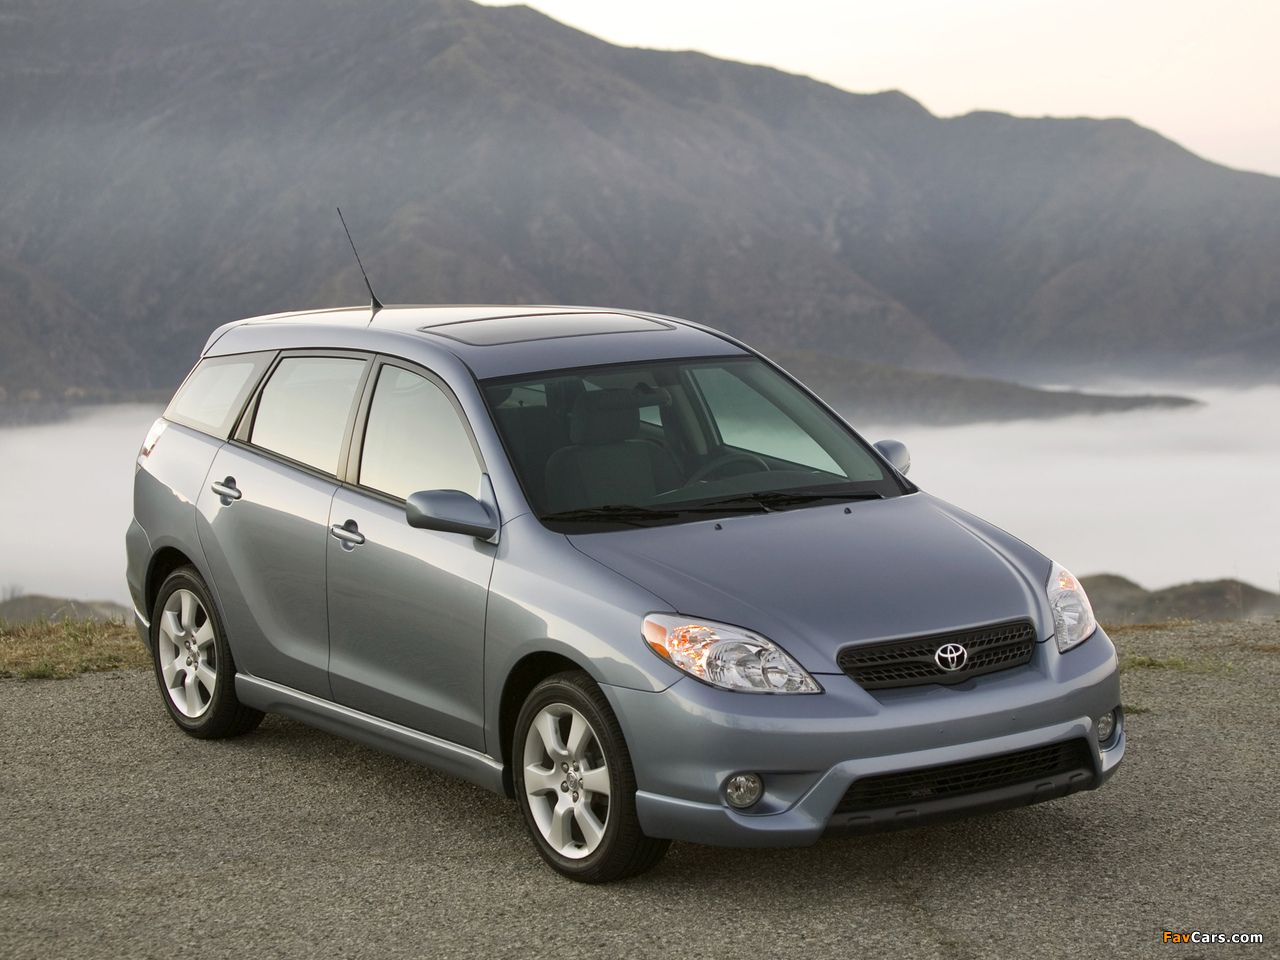 2007-toyota-matrix-xr-0-60-times-top-speed-specs-quarter-mile-and-wallpapers-mycarspecs